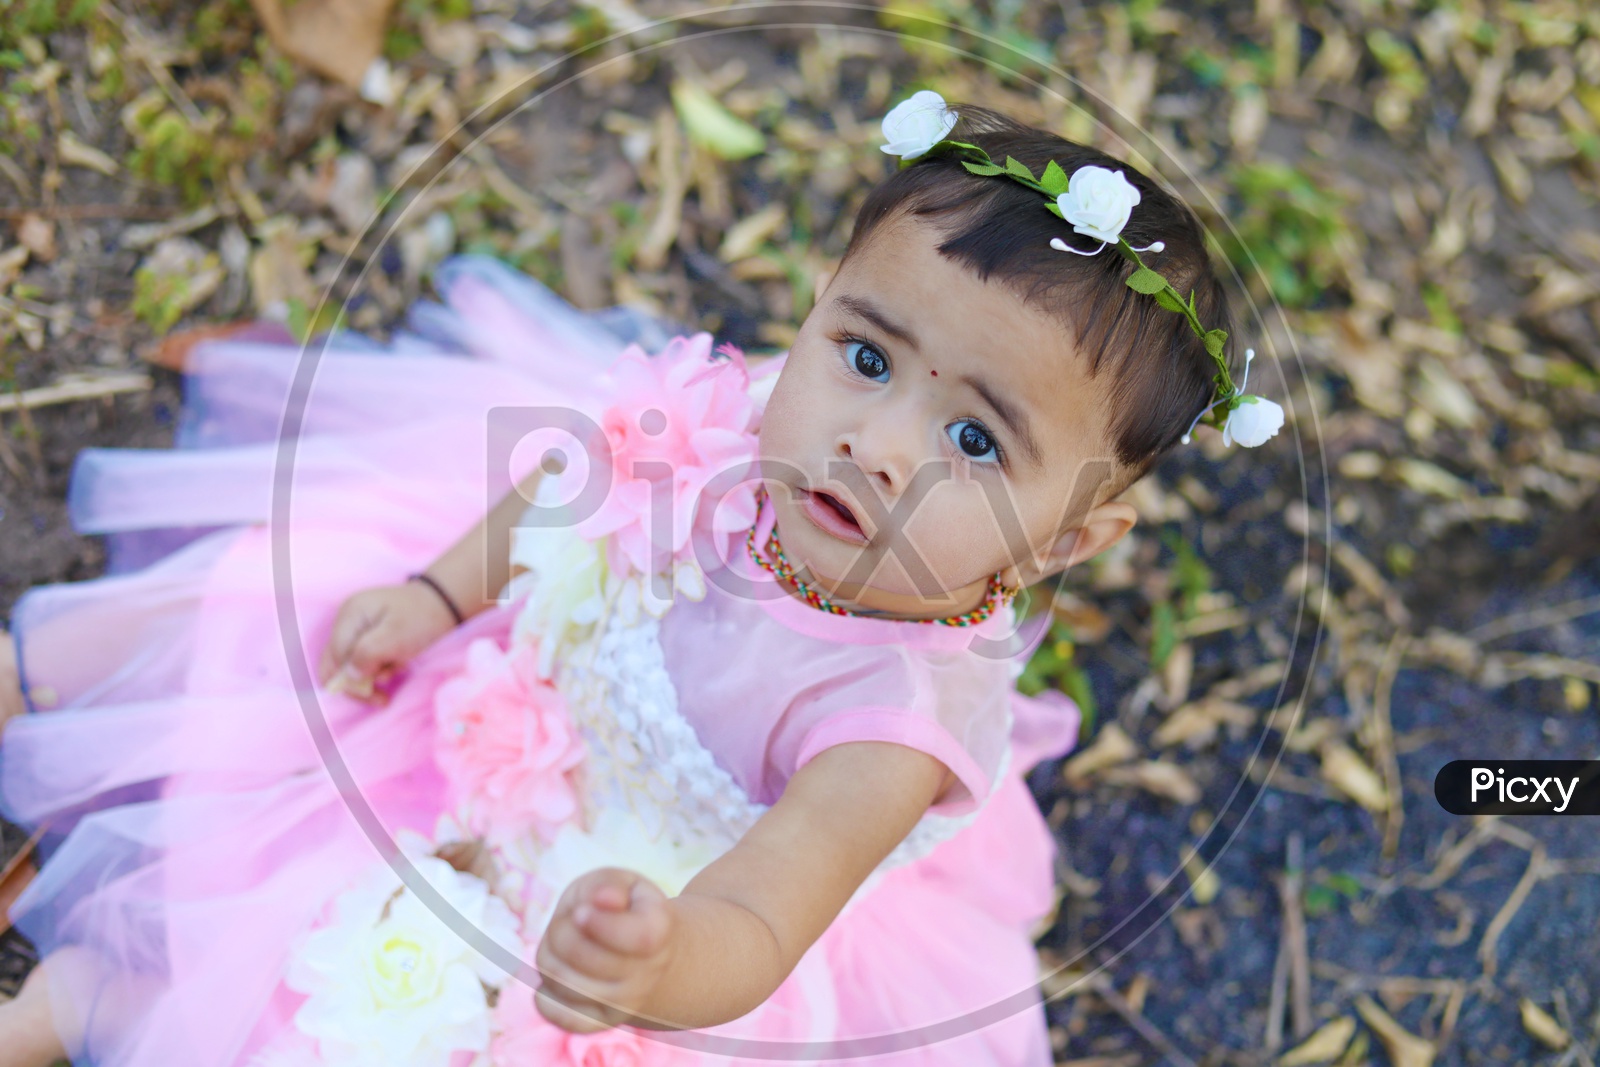 Baby girl in Pink frock with a flower hair band sitting in the middle of the fields